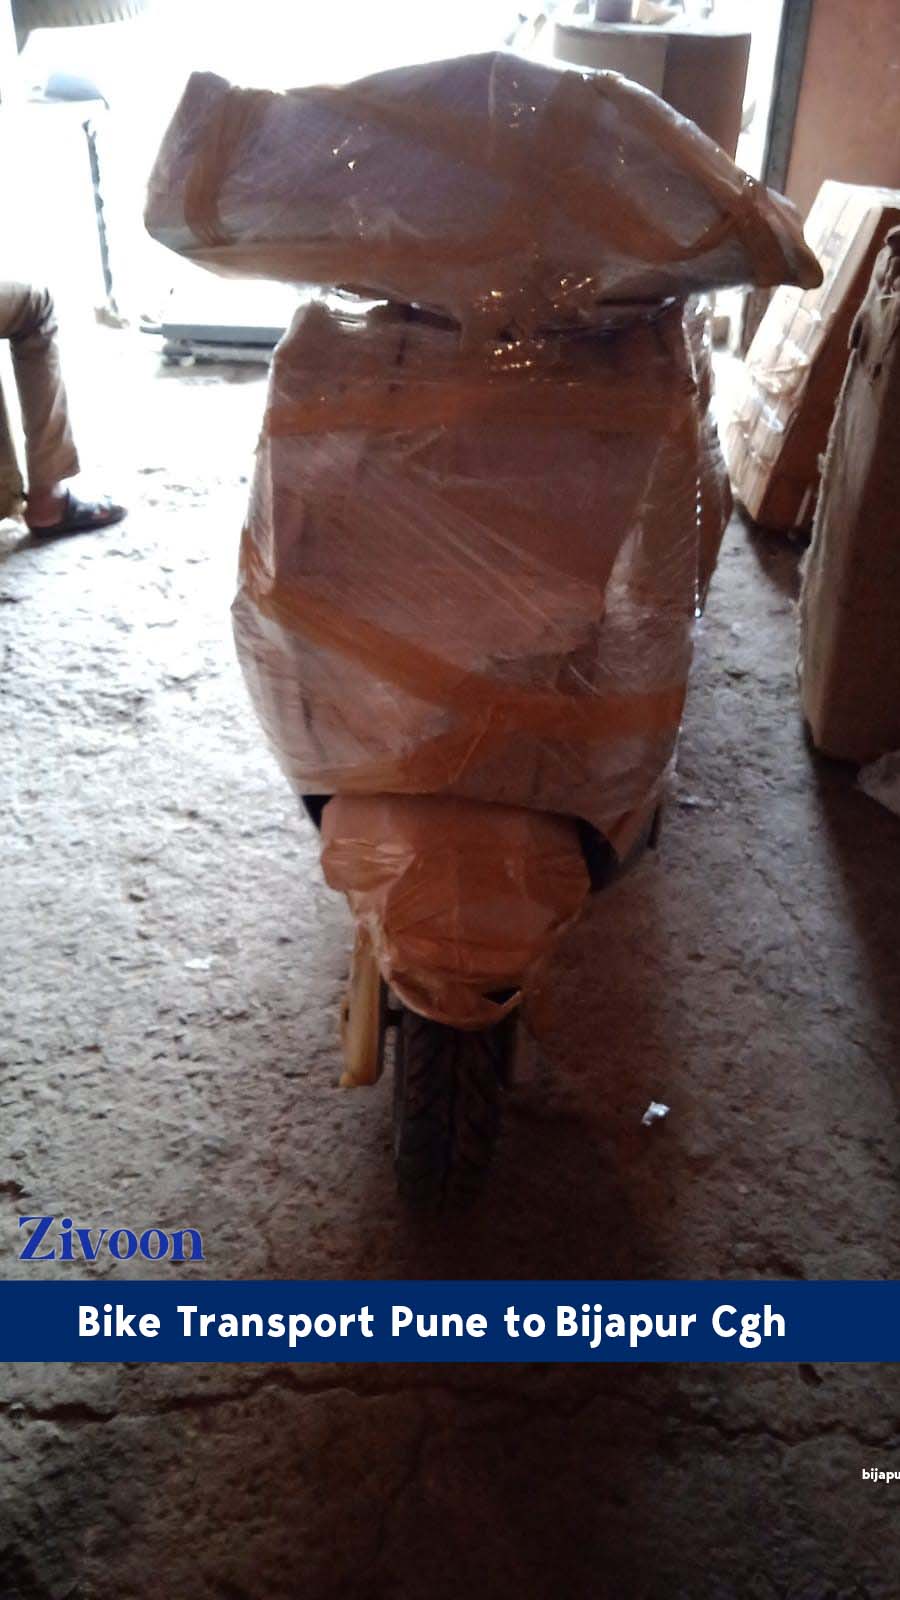 Bike Packers and Movers Pune to Bijapur Cgh